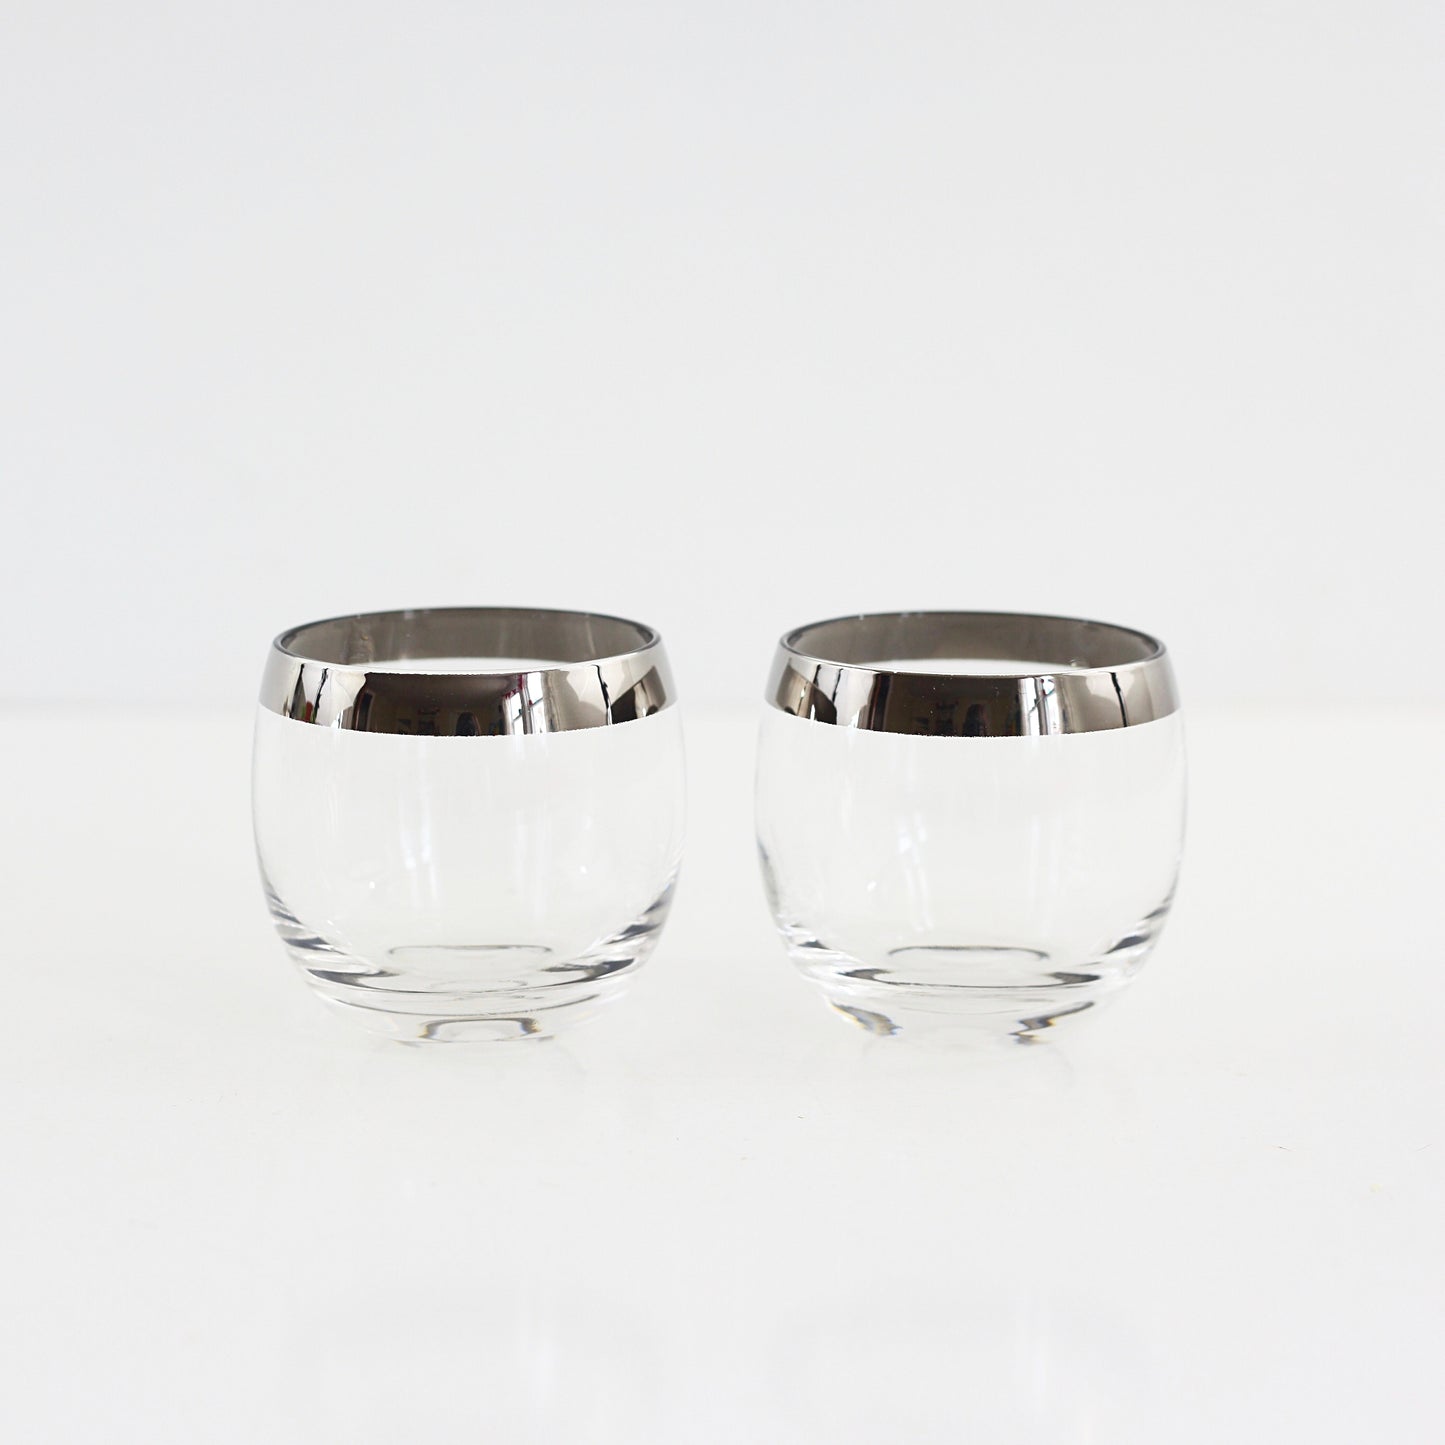 SOLD - Pair of Mid Century Dorothy Thorpe Roly Poly Glasses